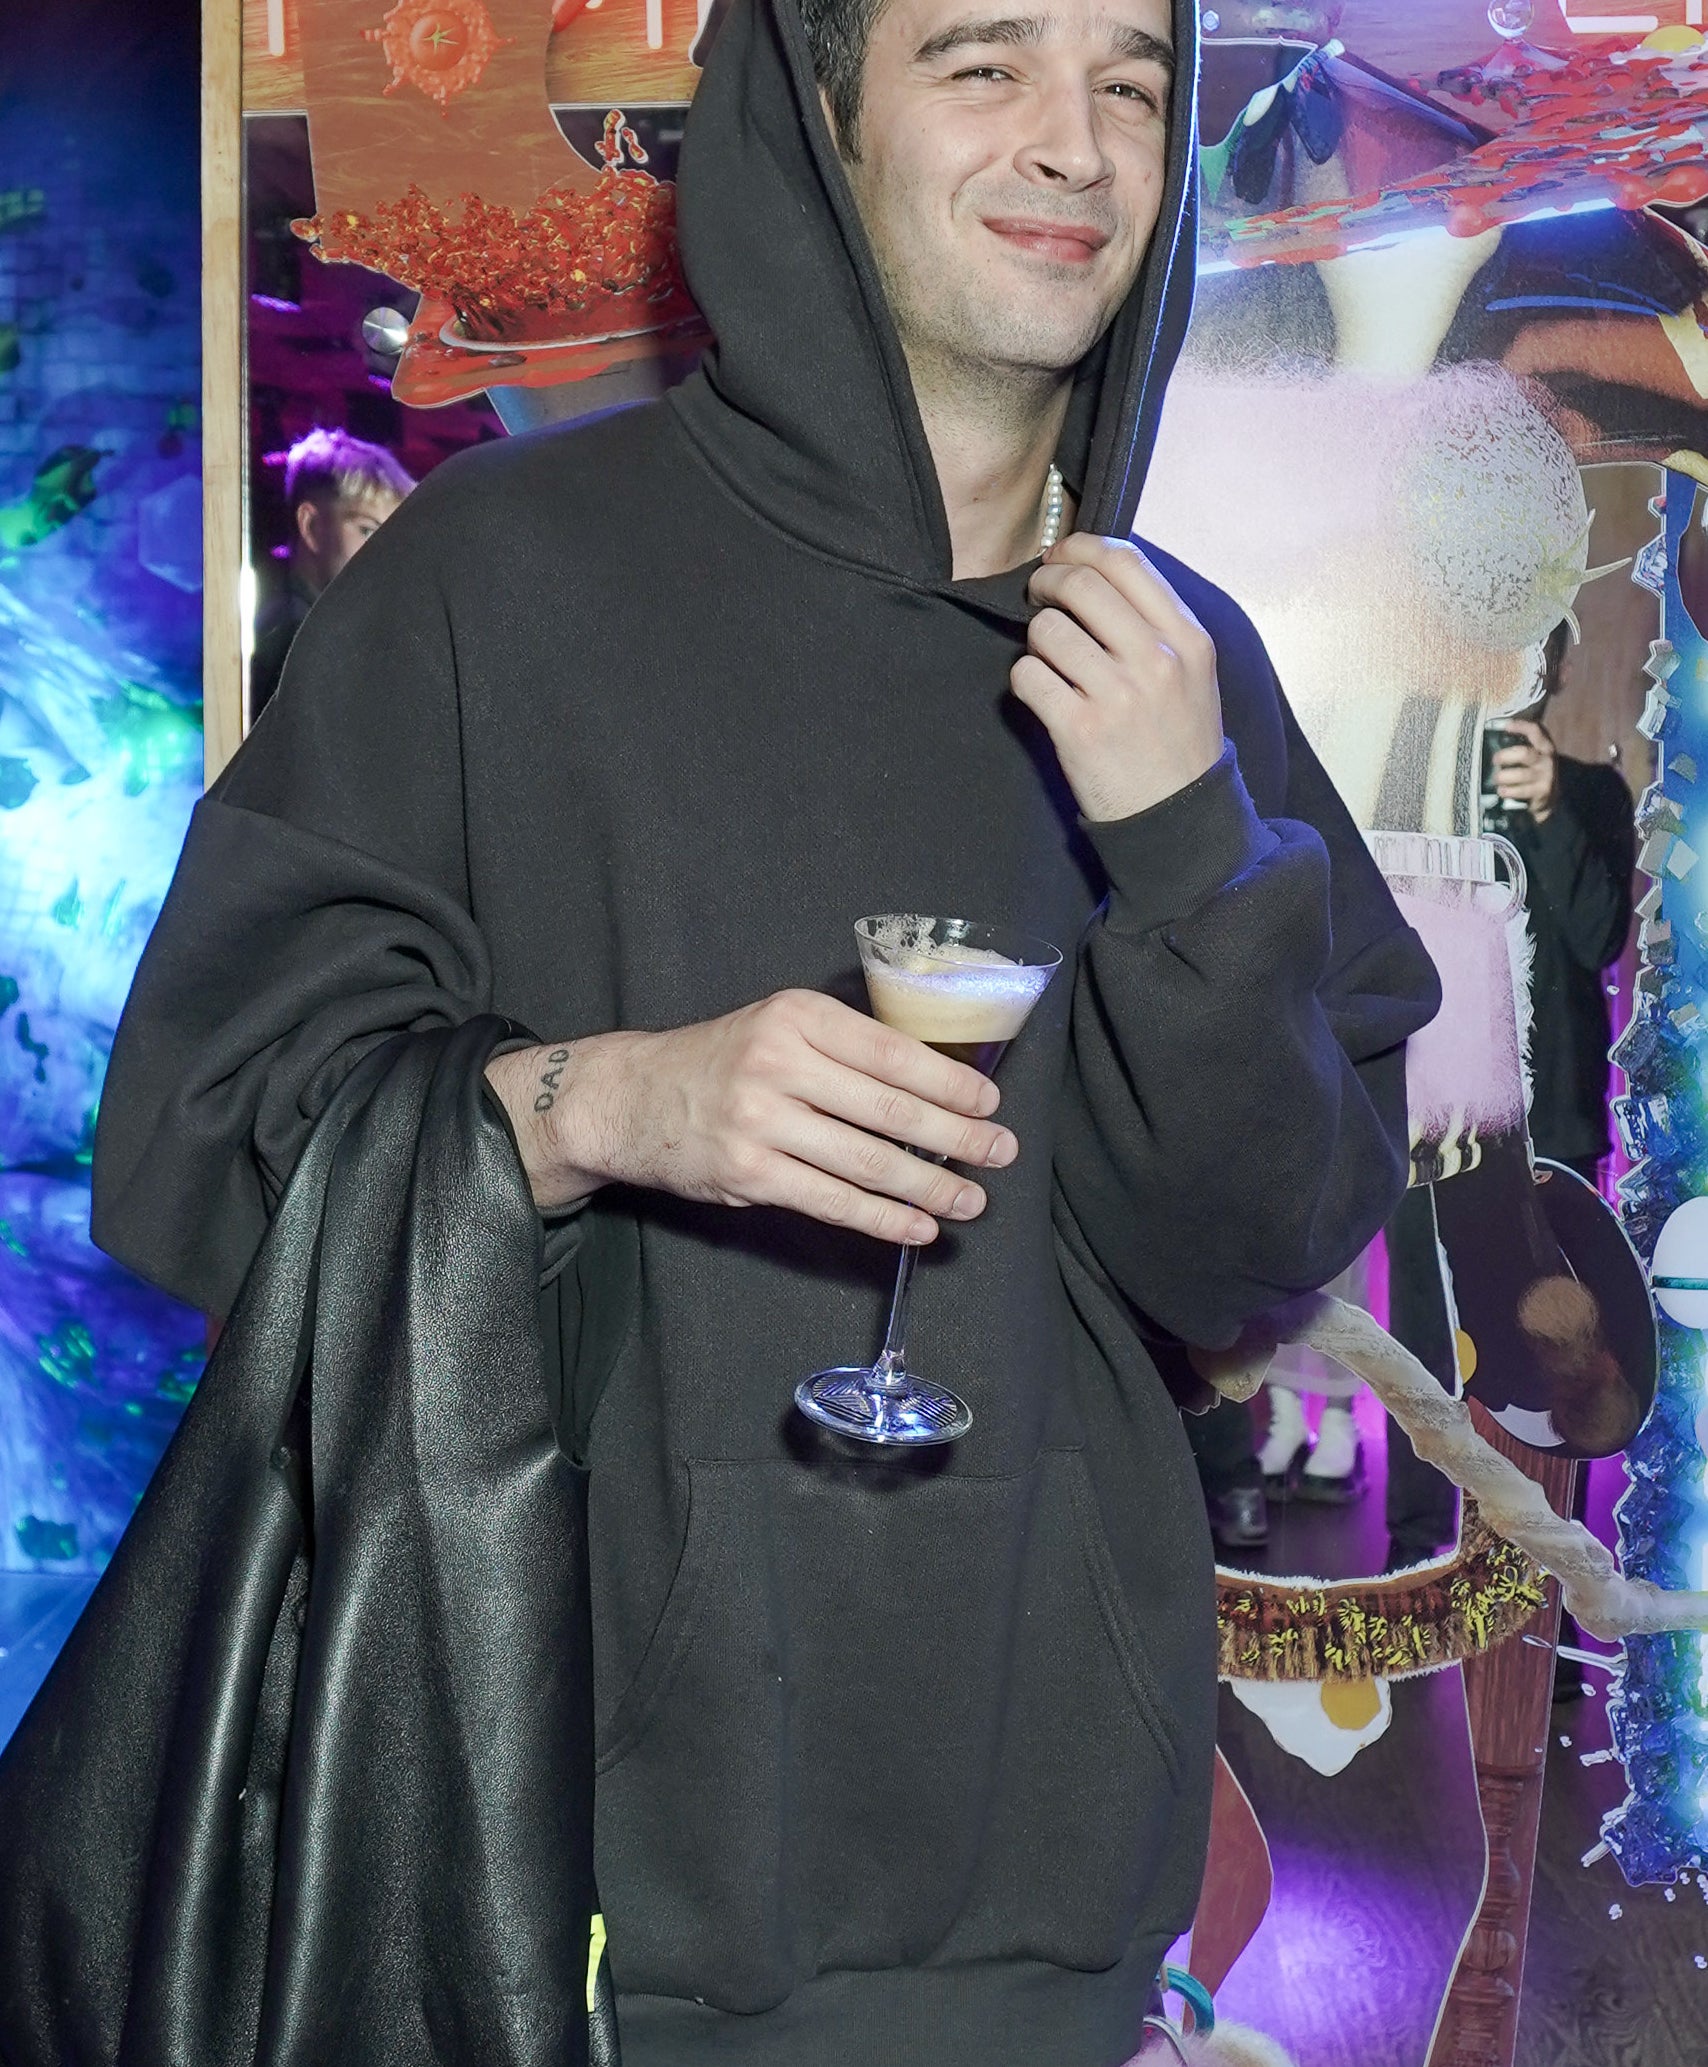 Matty in a hoodie and holding a drink